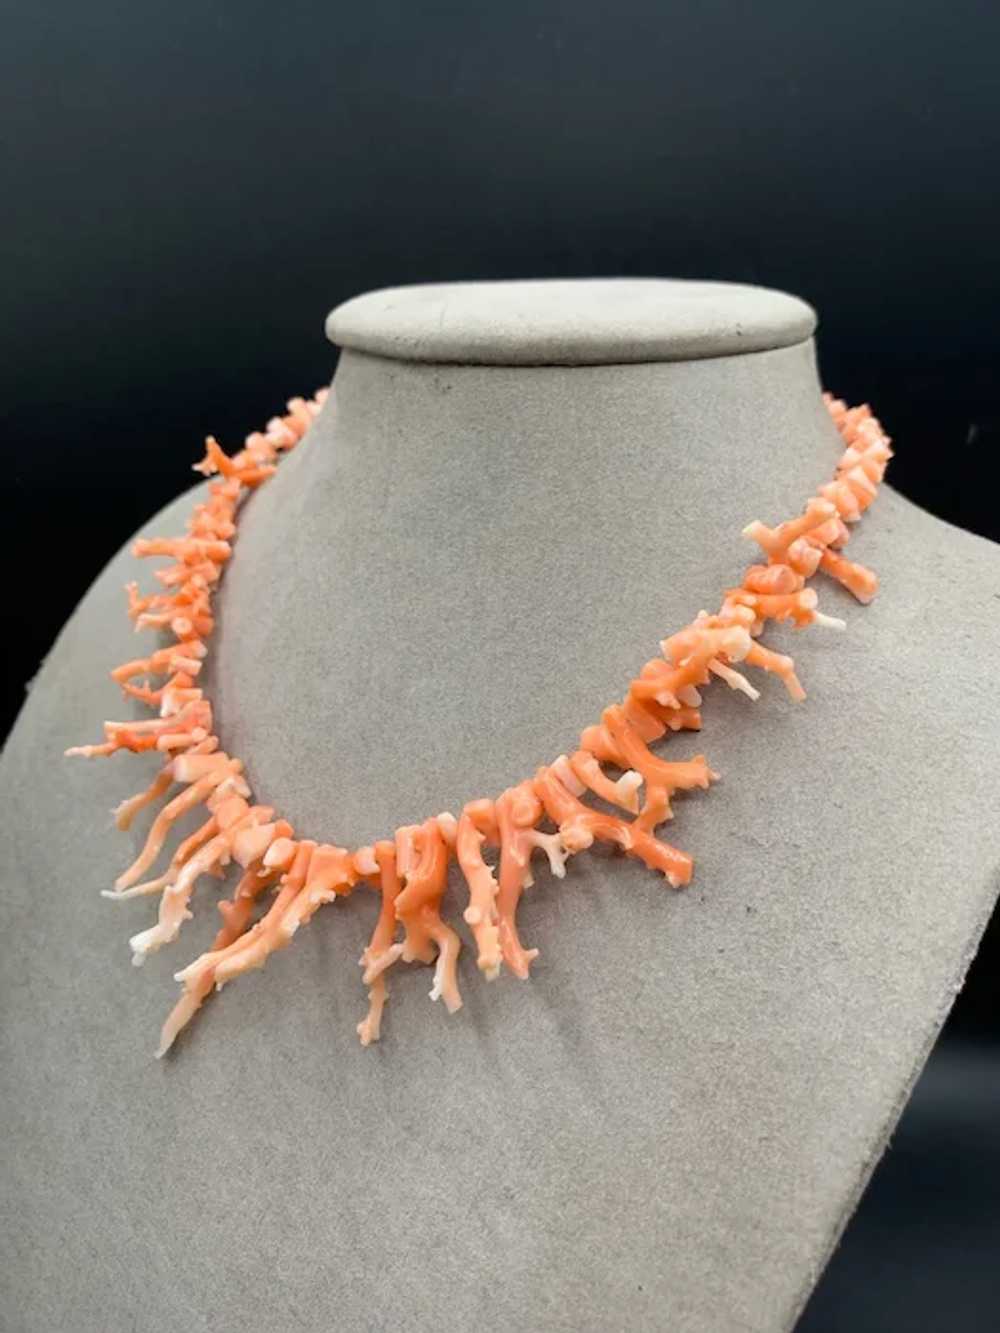 Branch Coral Necklace Pink Salmon Graduated Bib n… - image 6